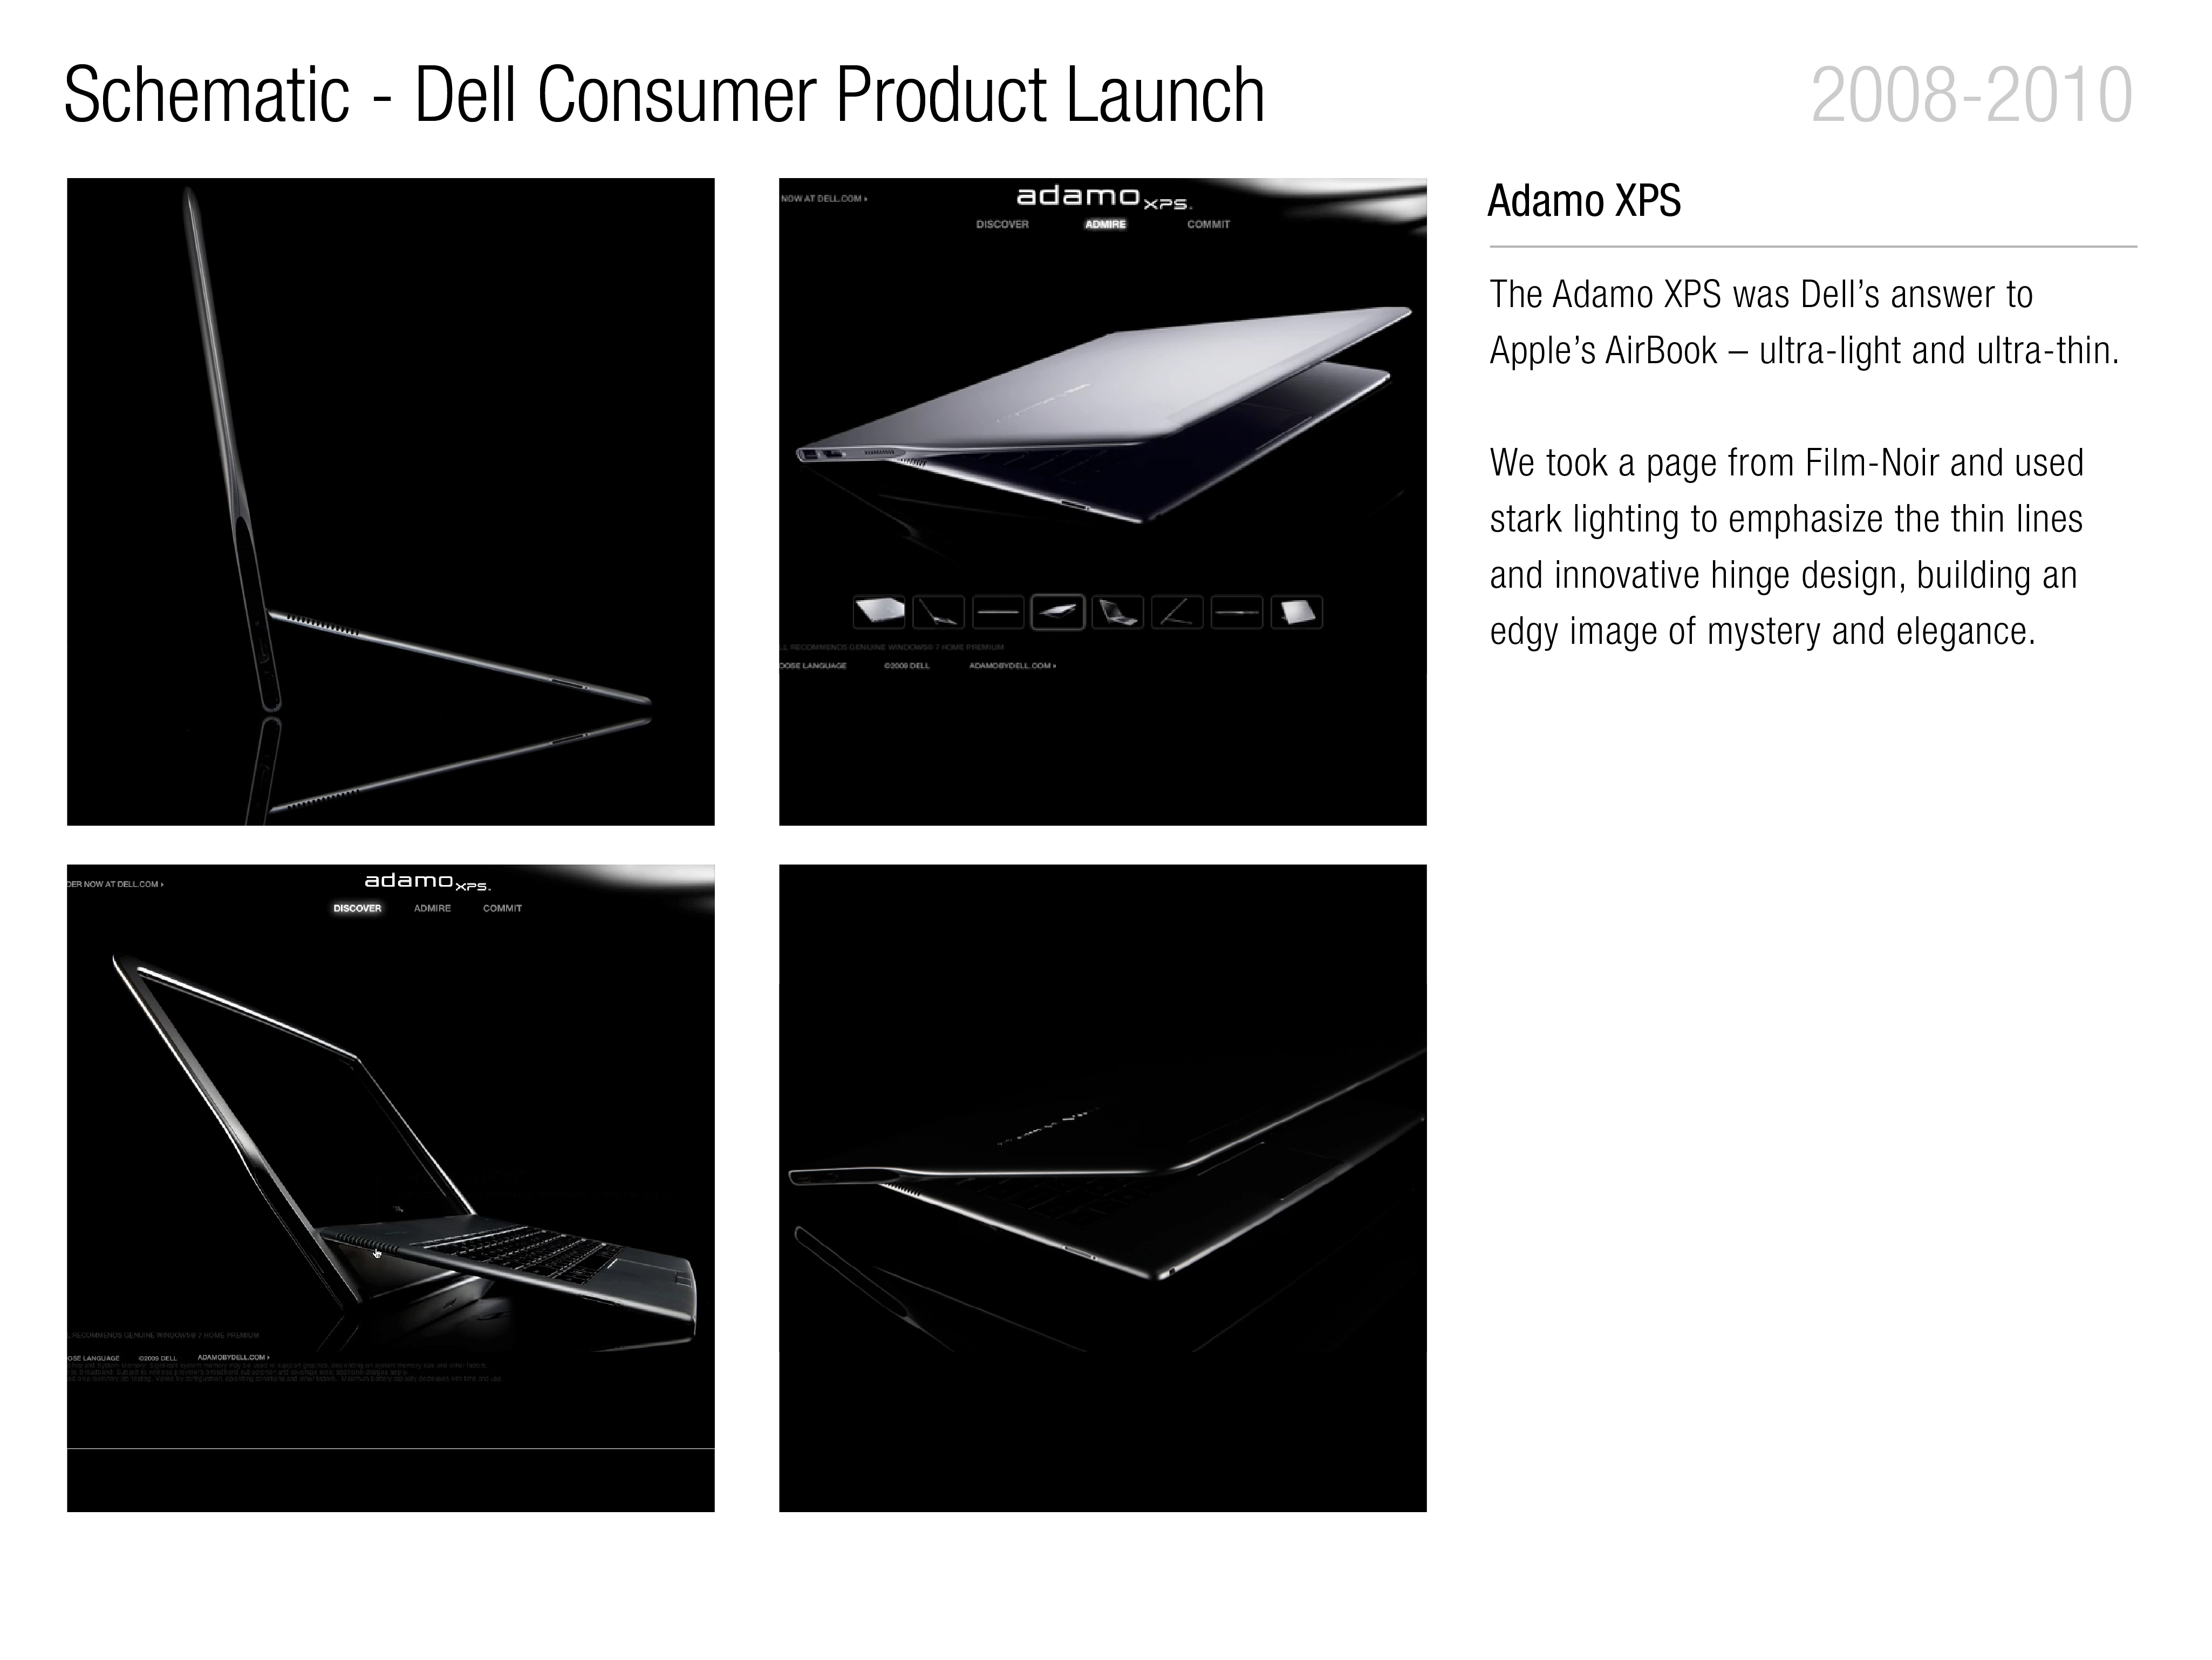 Page 8 - Dell - Global Consumer Product Launch - Adamo XPS